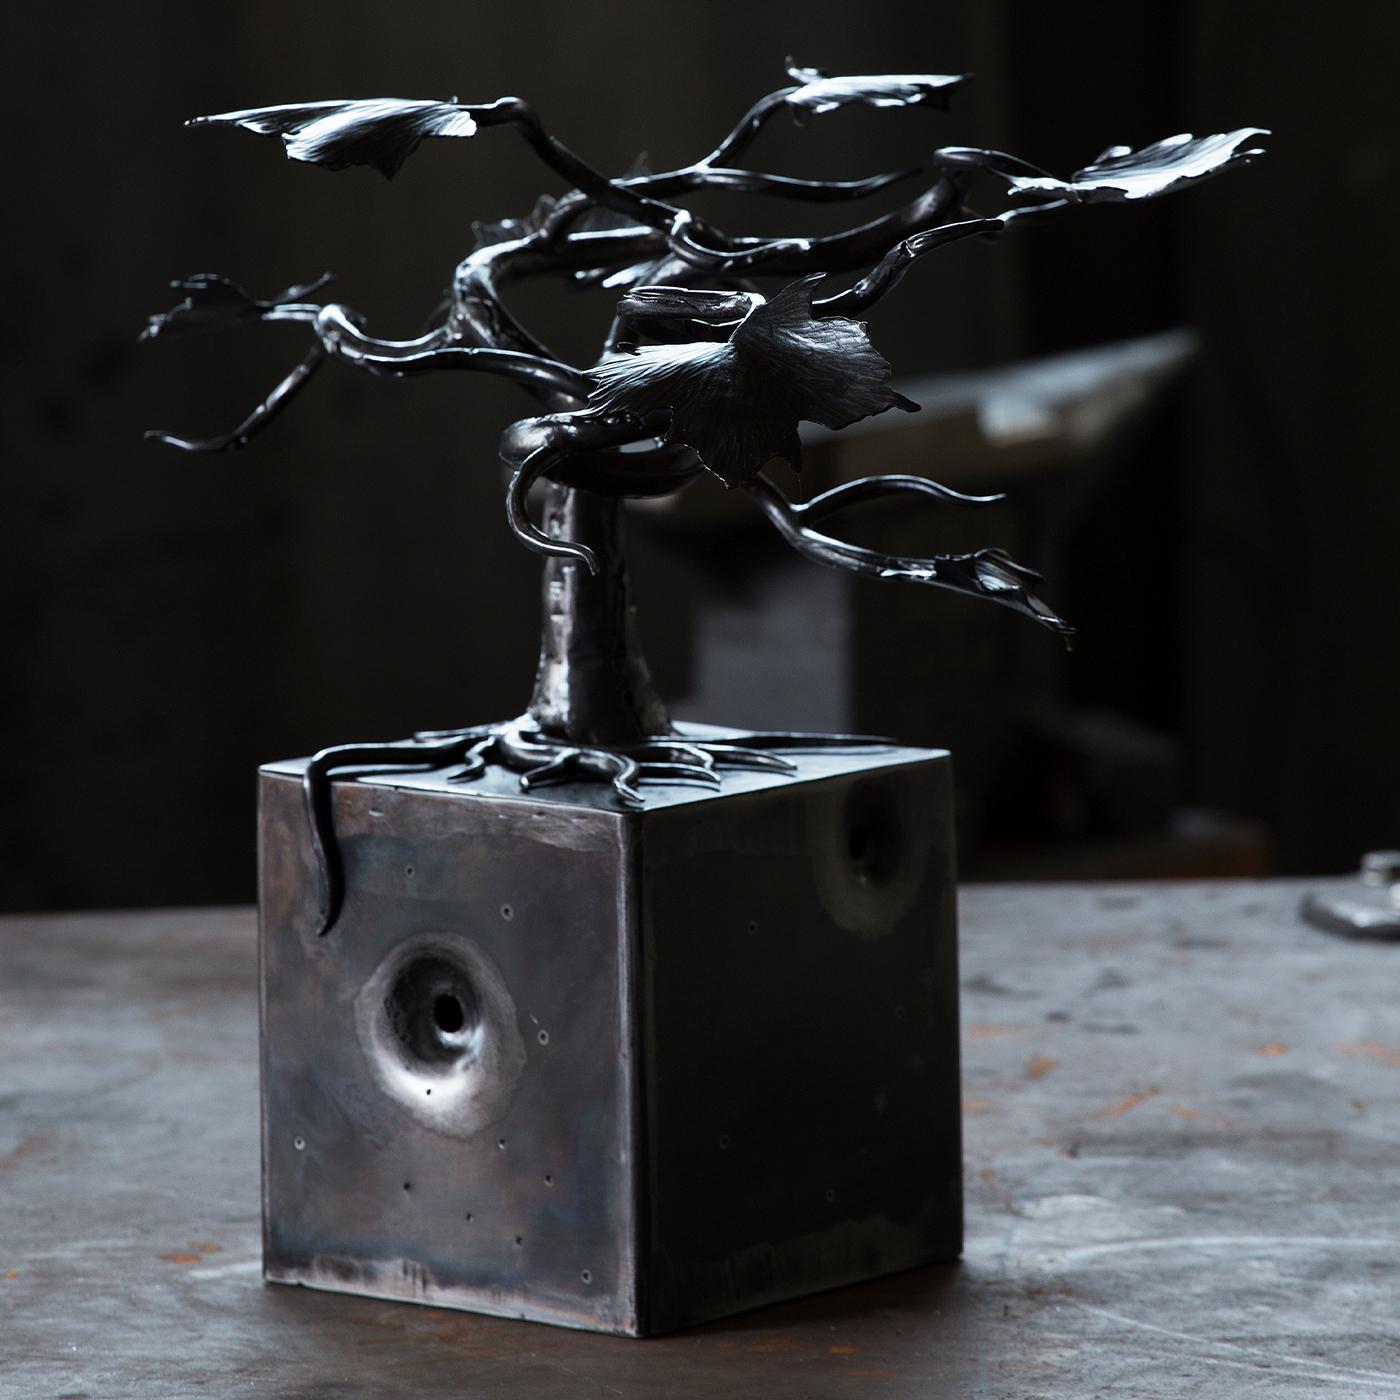 This refined work of art depicts a maple bonsai, handcrafted of steel and featuring a carved log that reminds of oneiric landscapes. Exuding calmness and rapture, the piece was exhibited at the 24th International Art Show of Innsbruck in 2020.